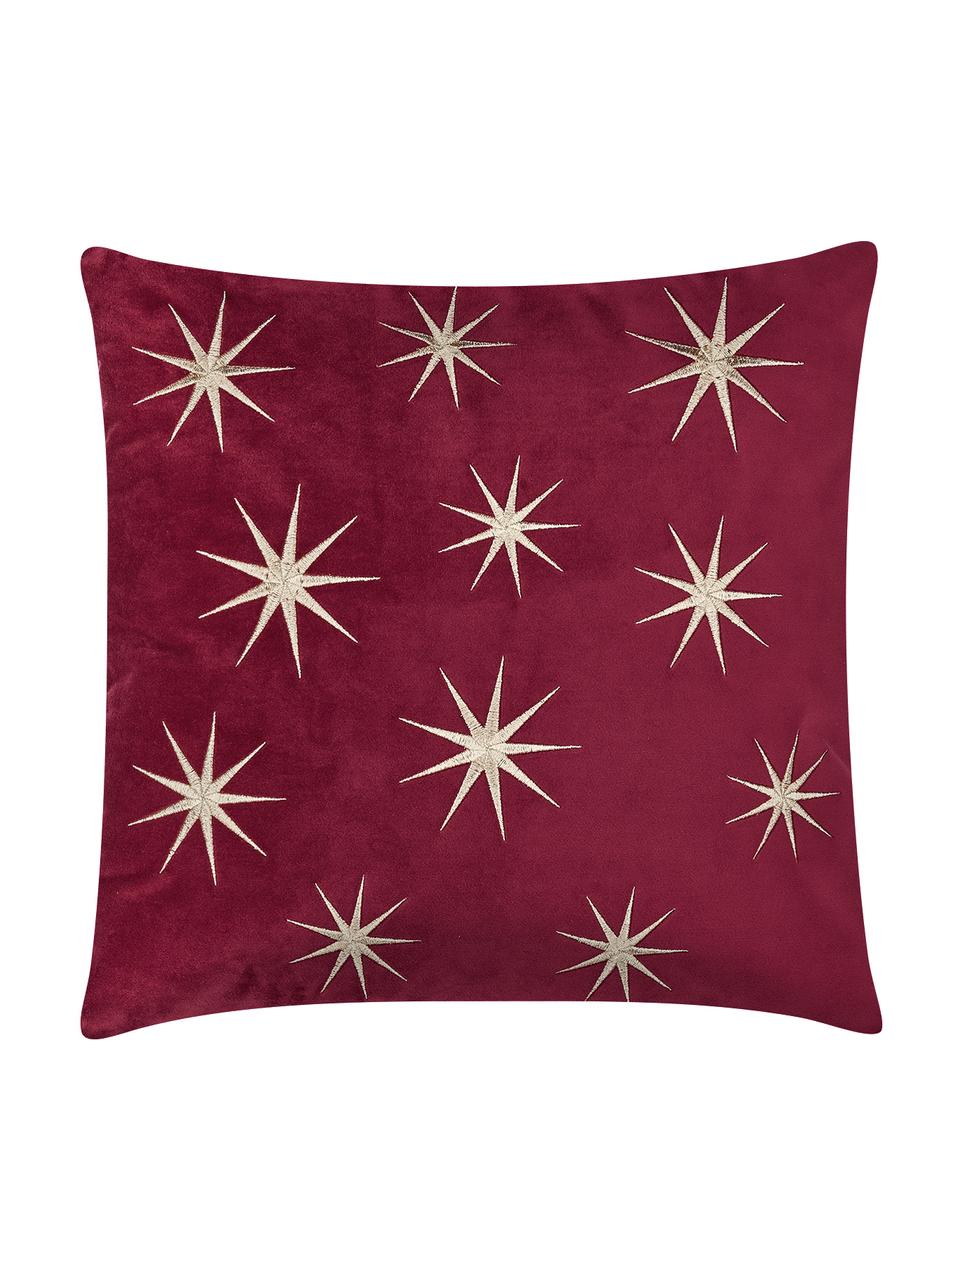 Federa in velluto con stelle ricamate Stars, Rosso, Larg. 45 x Lung. 45 cm